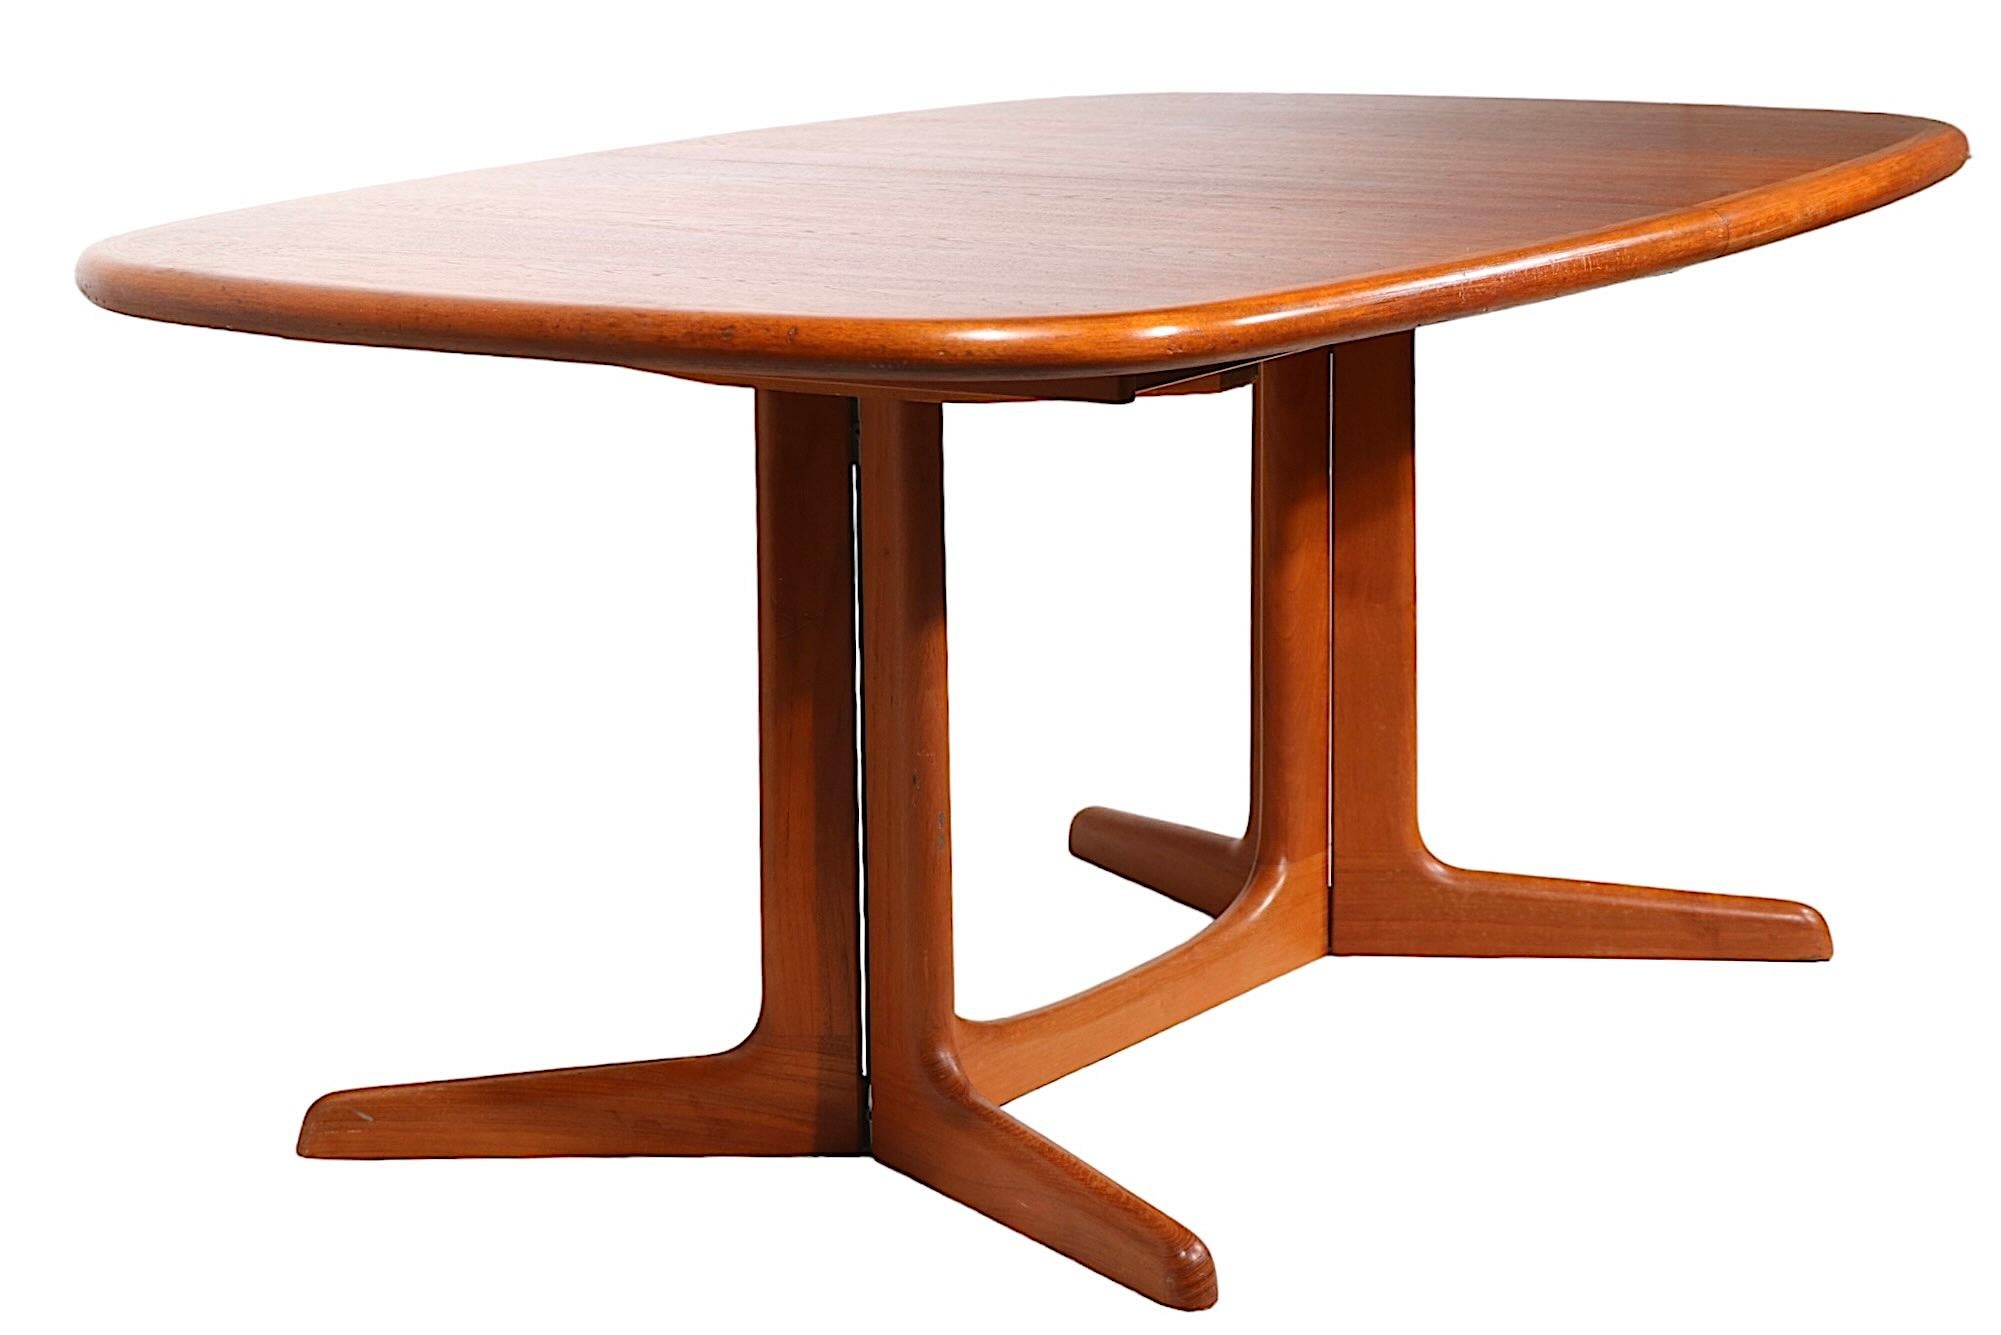 Danish Mid Century Oval Teak Dining Table by Niels Otto Moller for Gudme c 1970s For Sale 6